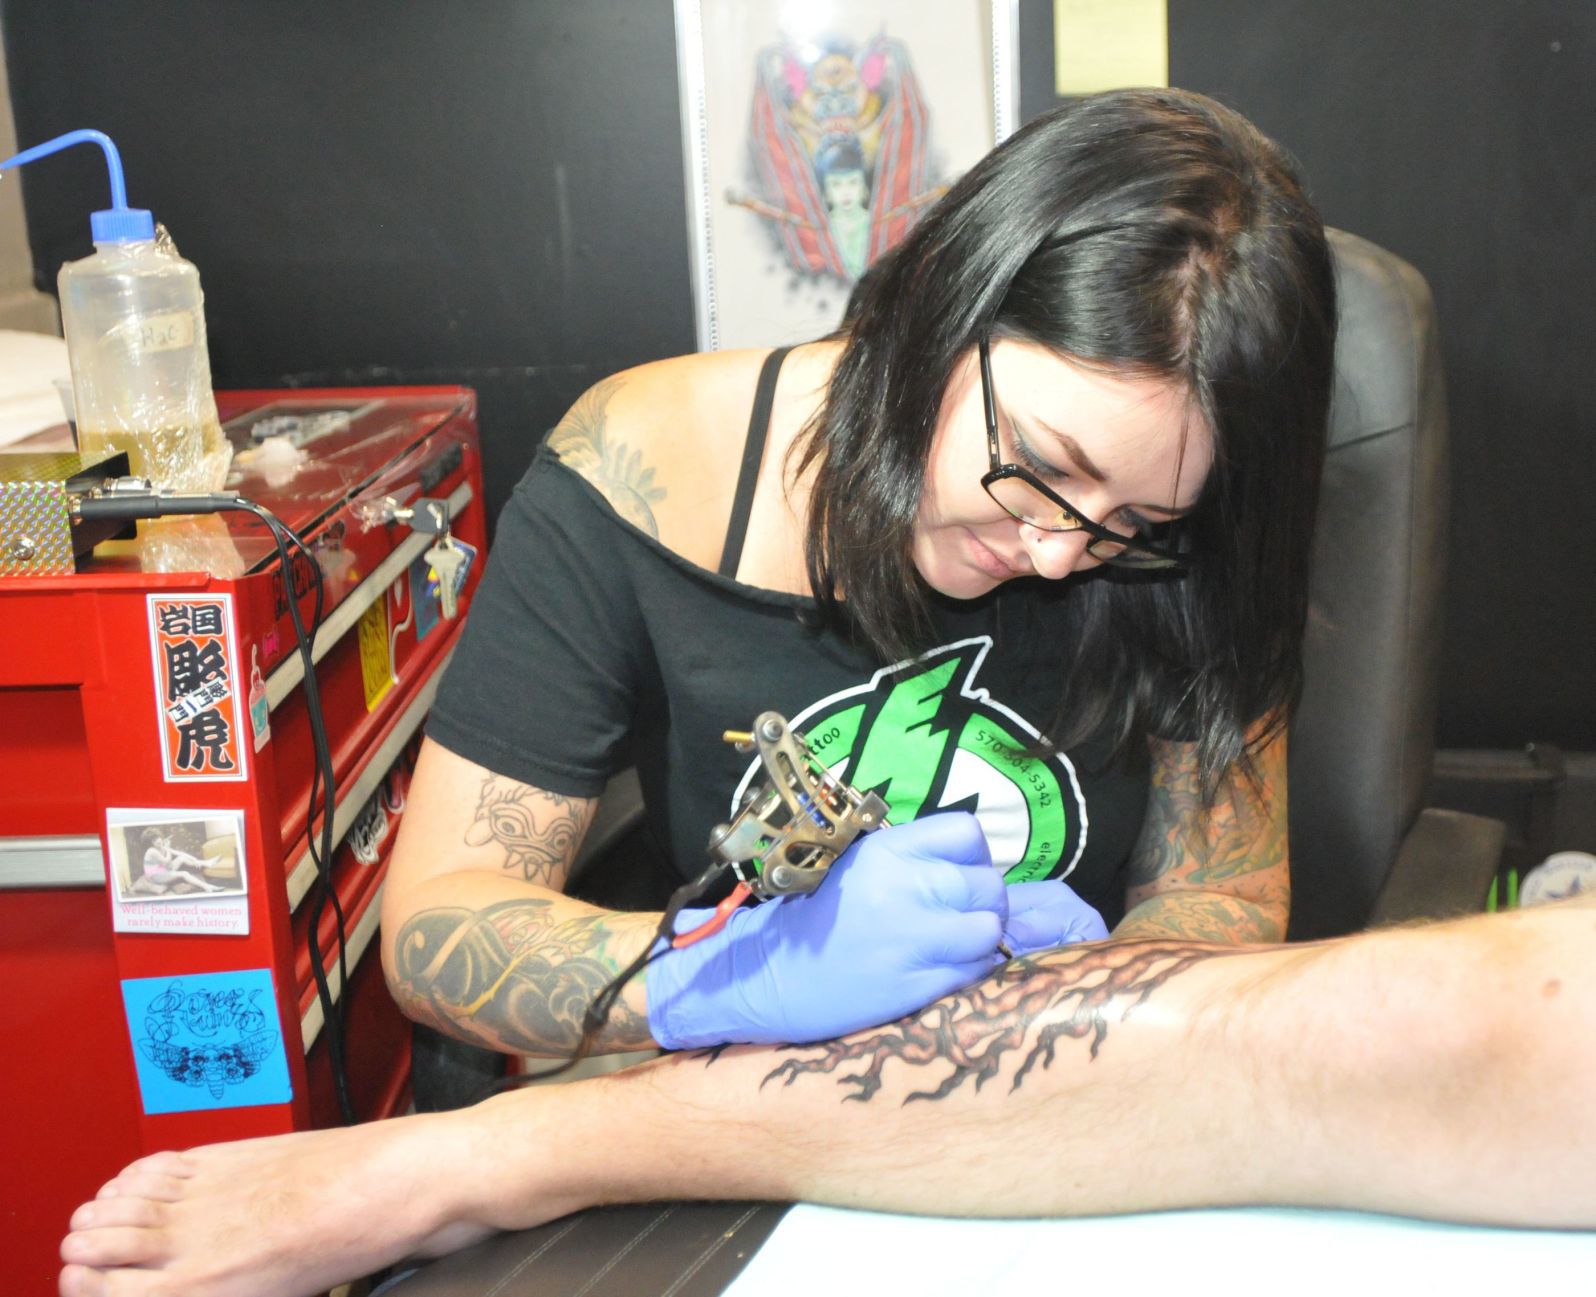 Local tattoo artist is in running for 'Ink Master' title